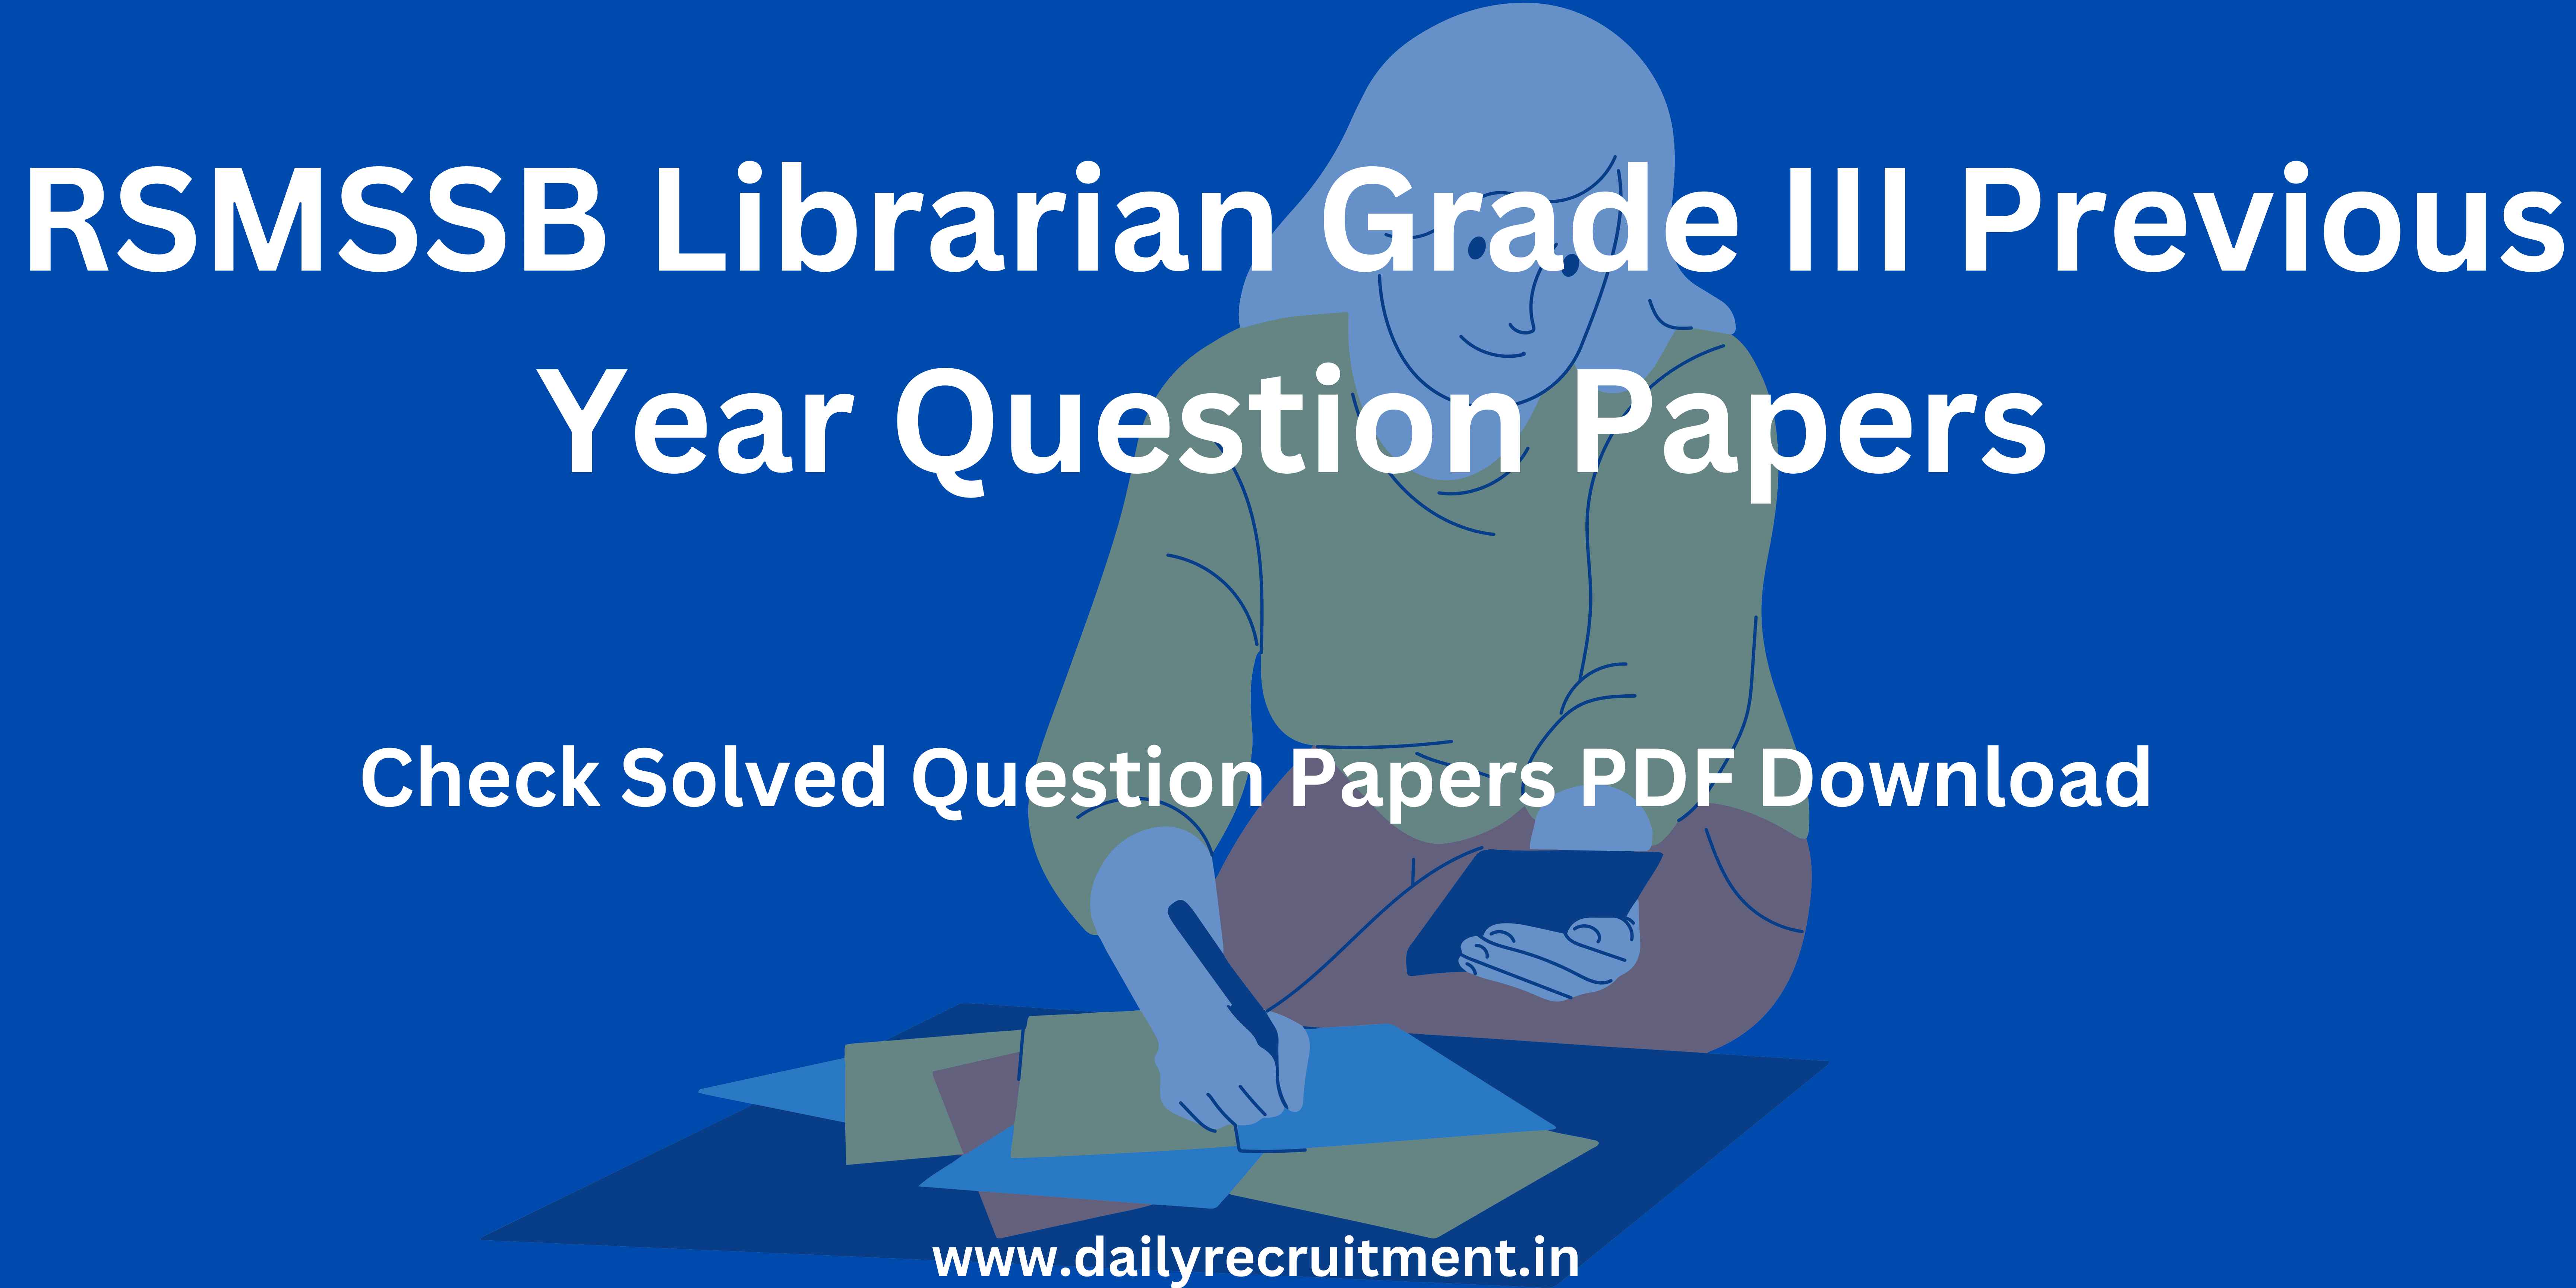 RSMSSB Librarian Grade III Question Papers